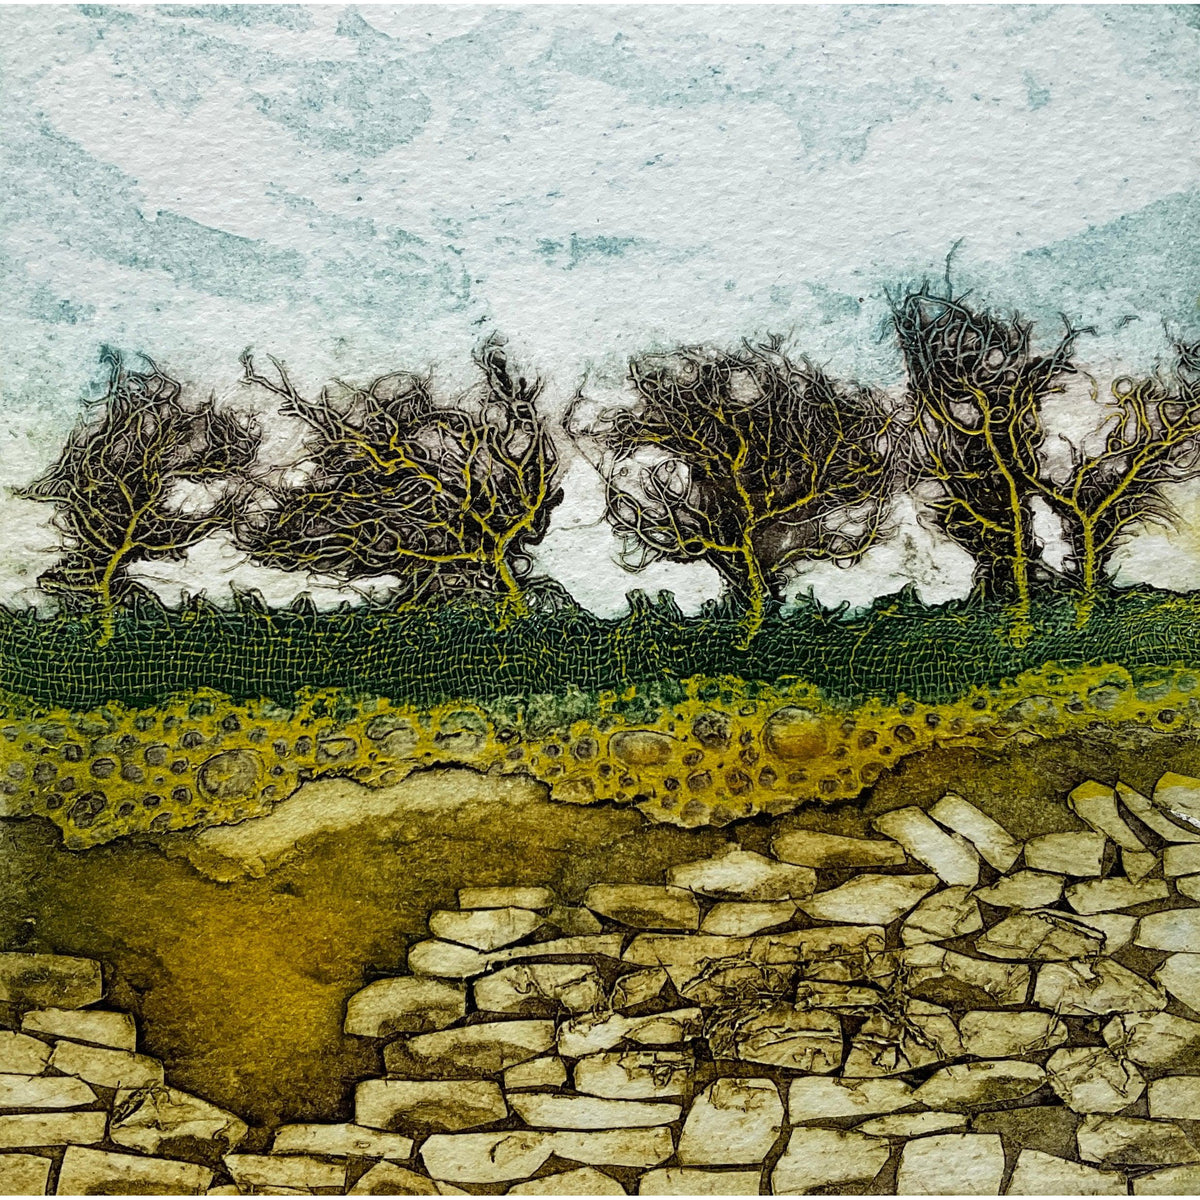 Come Hither, limited edition collagraph  by Sarah Ross-Thompson available at Padstow Gallery, Cornwall